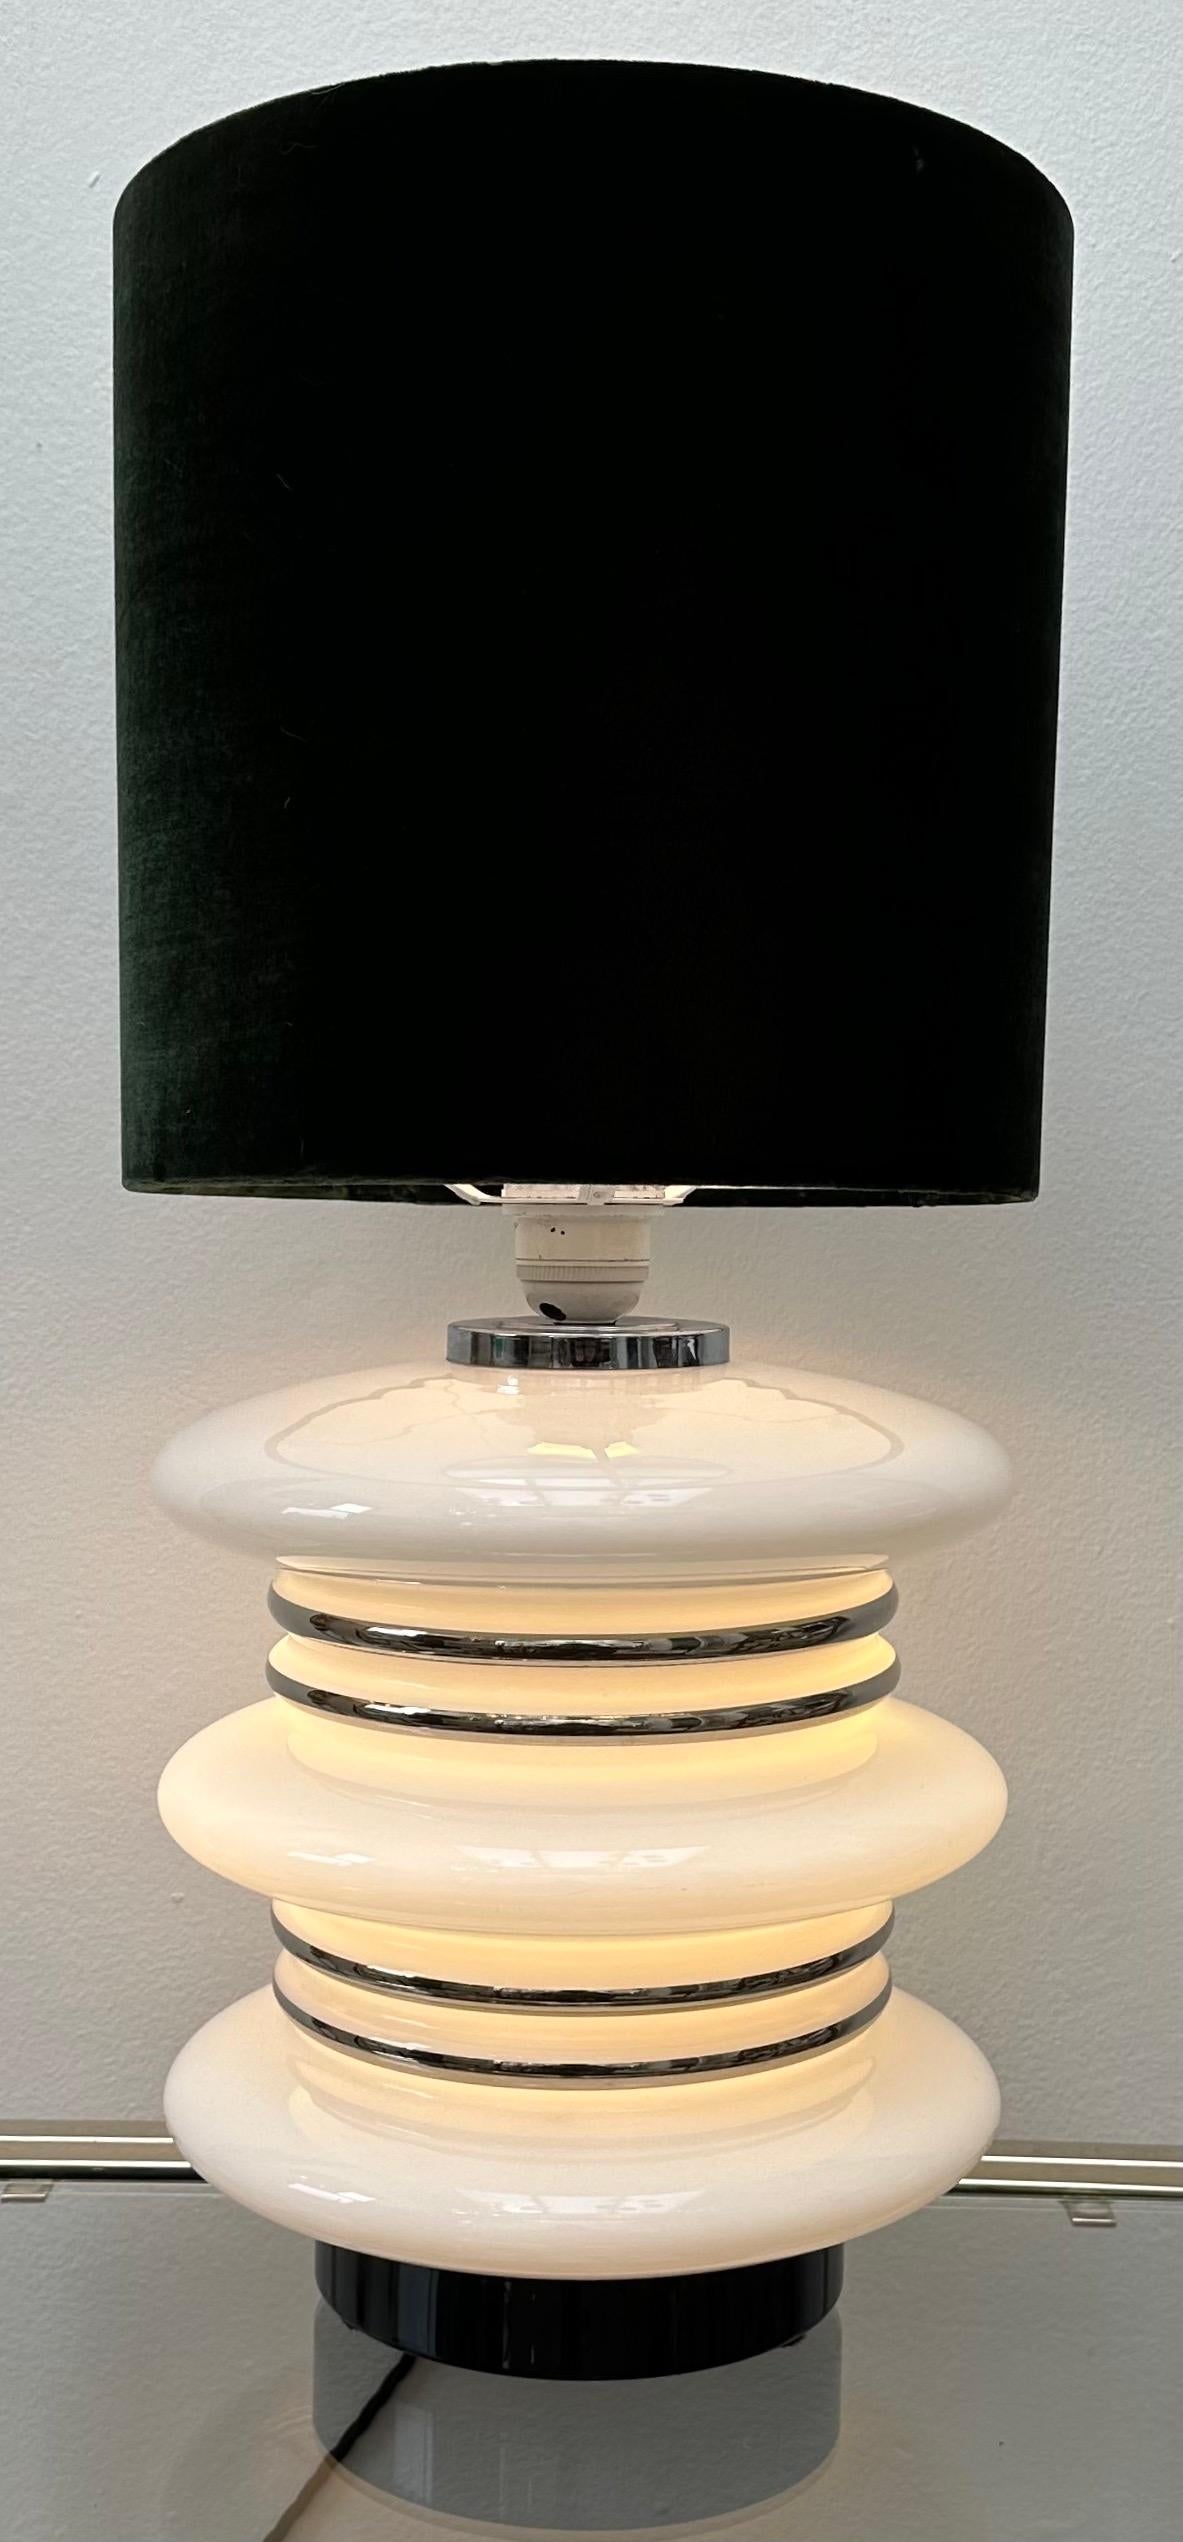 1970s German, futuristic, space-age, white opal glass and chrome table lamp attributed to Leclaire & Schäfer. The illuminated lamp base requires two E27 screw-in lightbulbs inside with each one pointing in opposite directions which allows the light